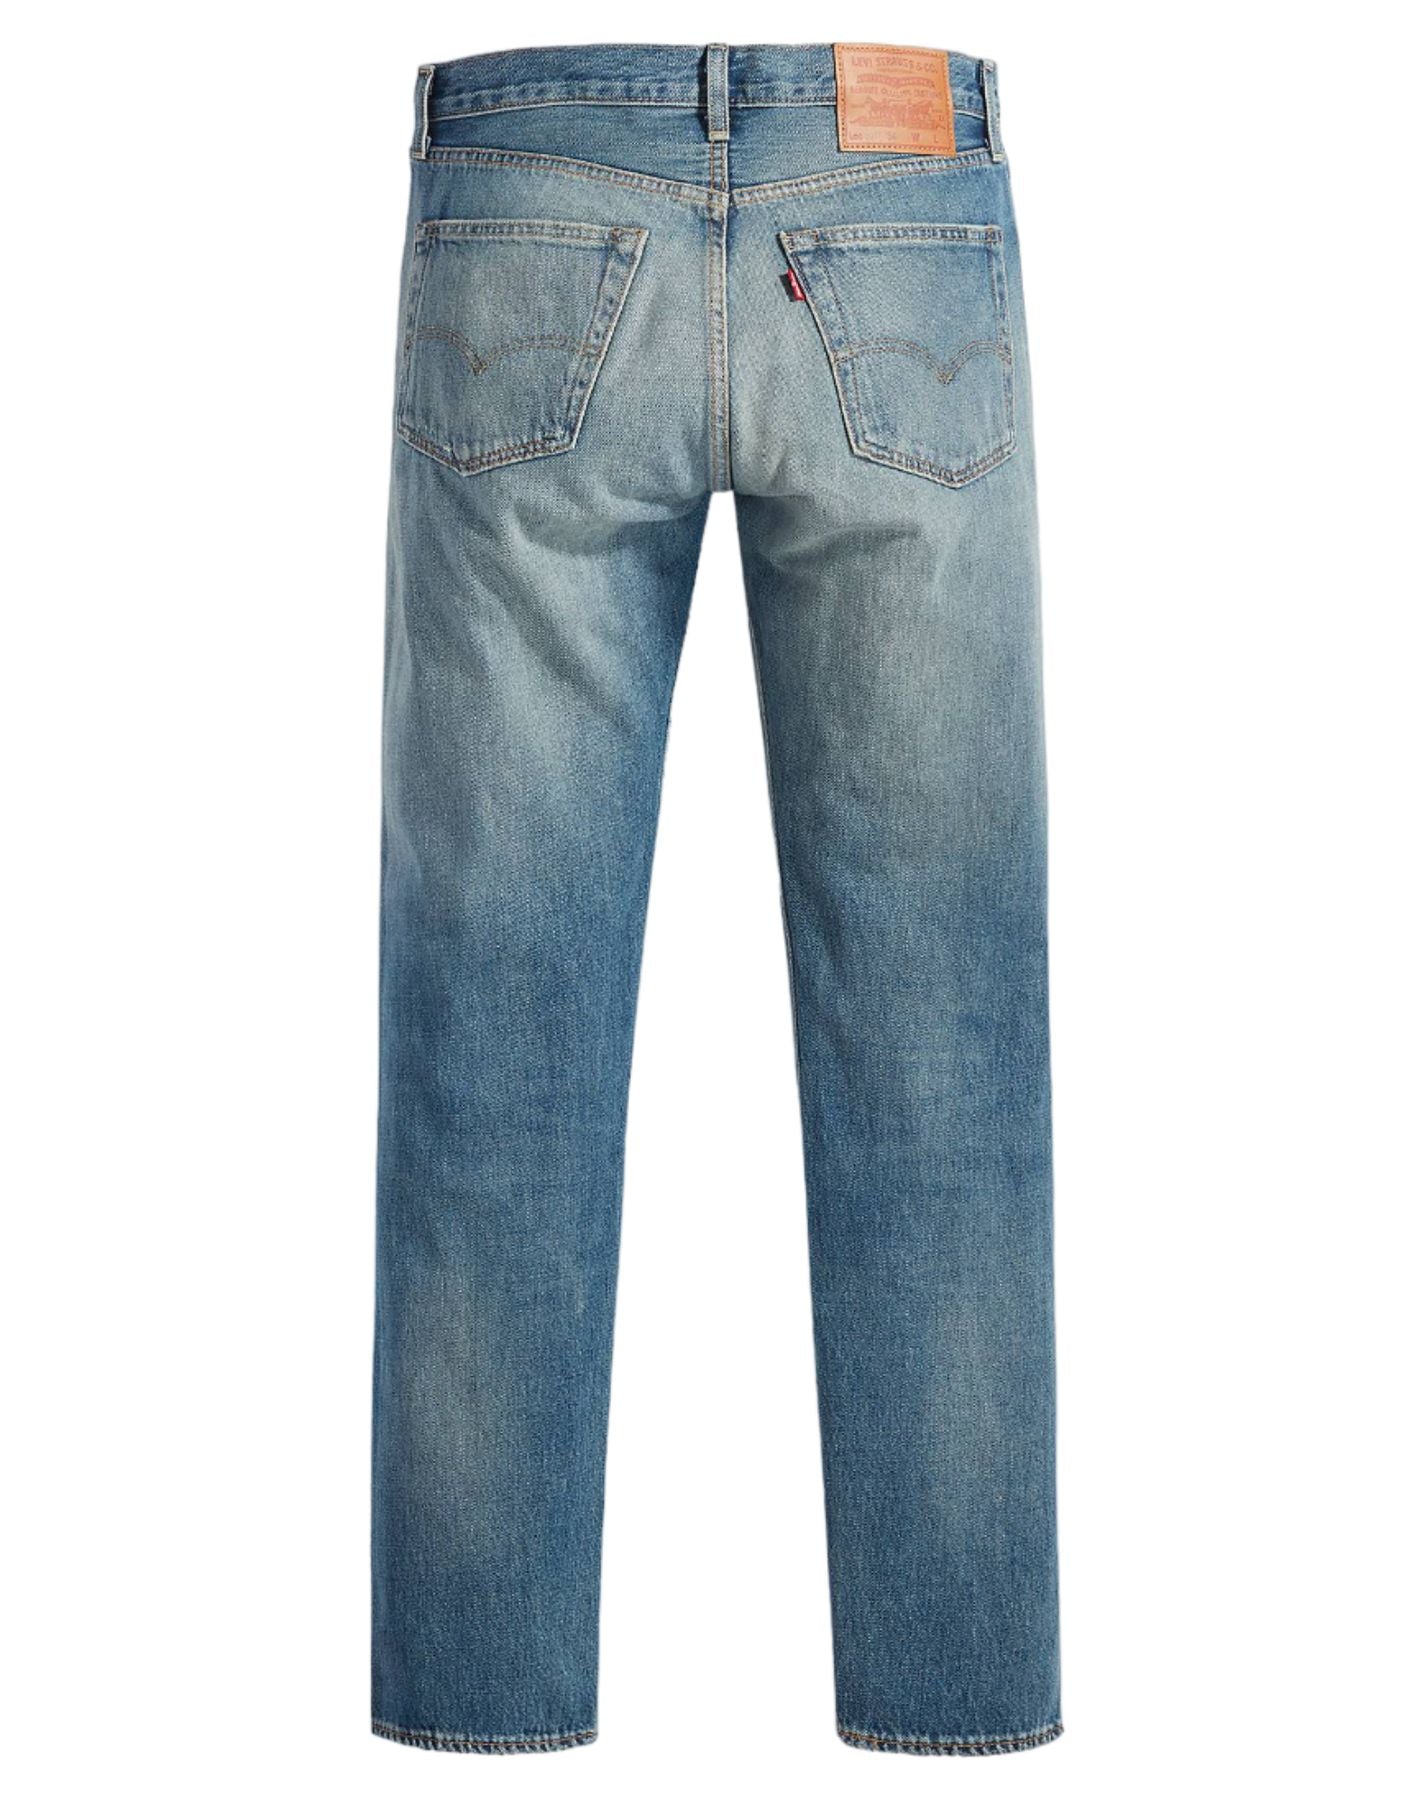 Jeans for man A46770014 MISTY LAKE Levi's